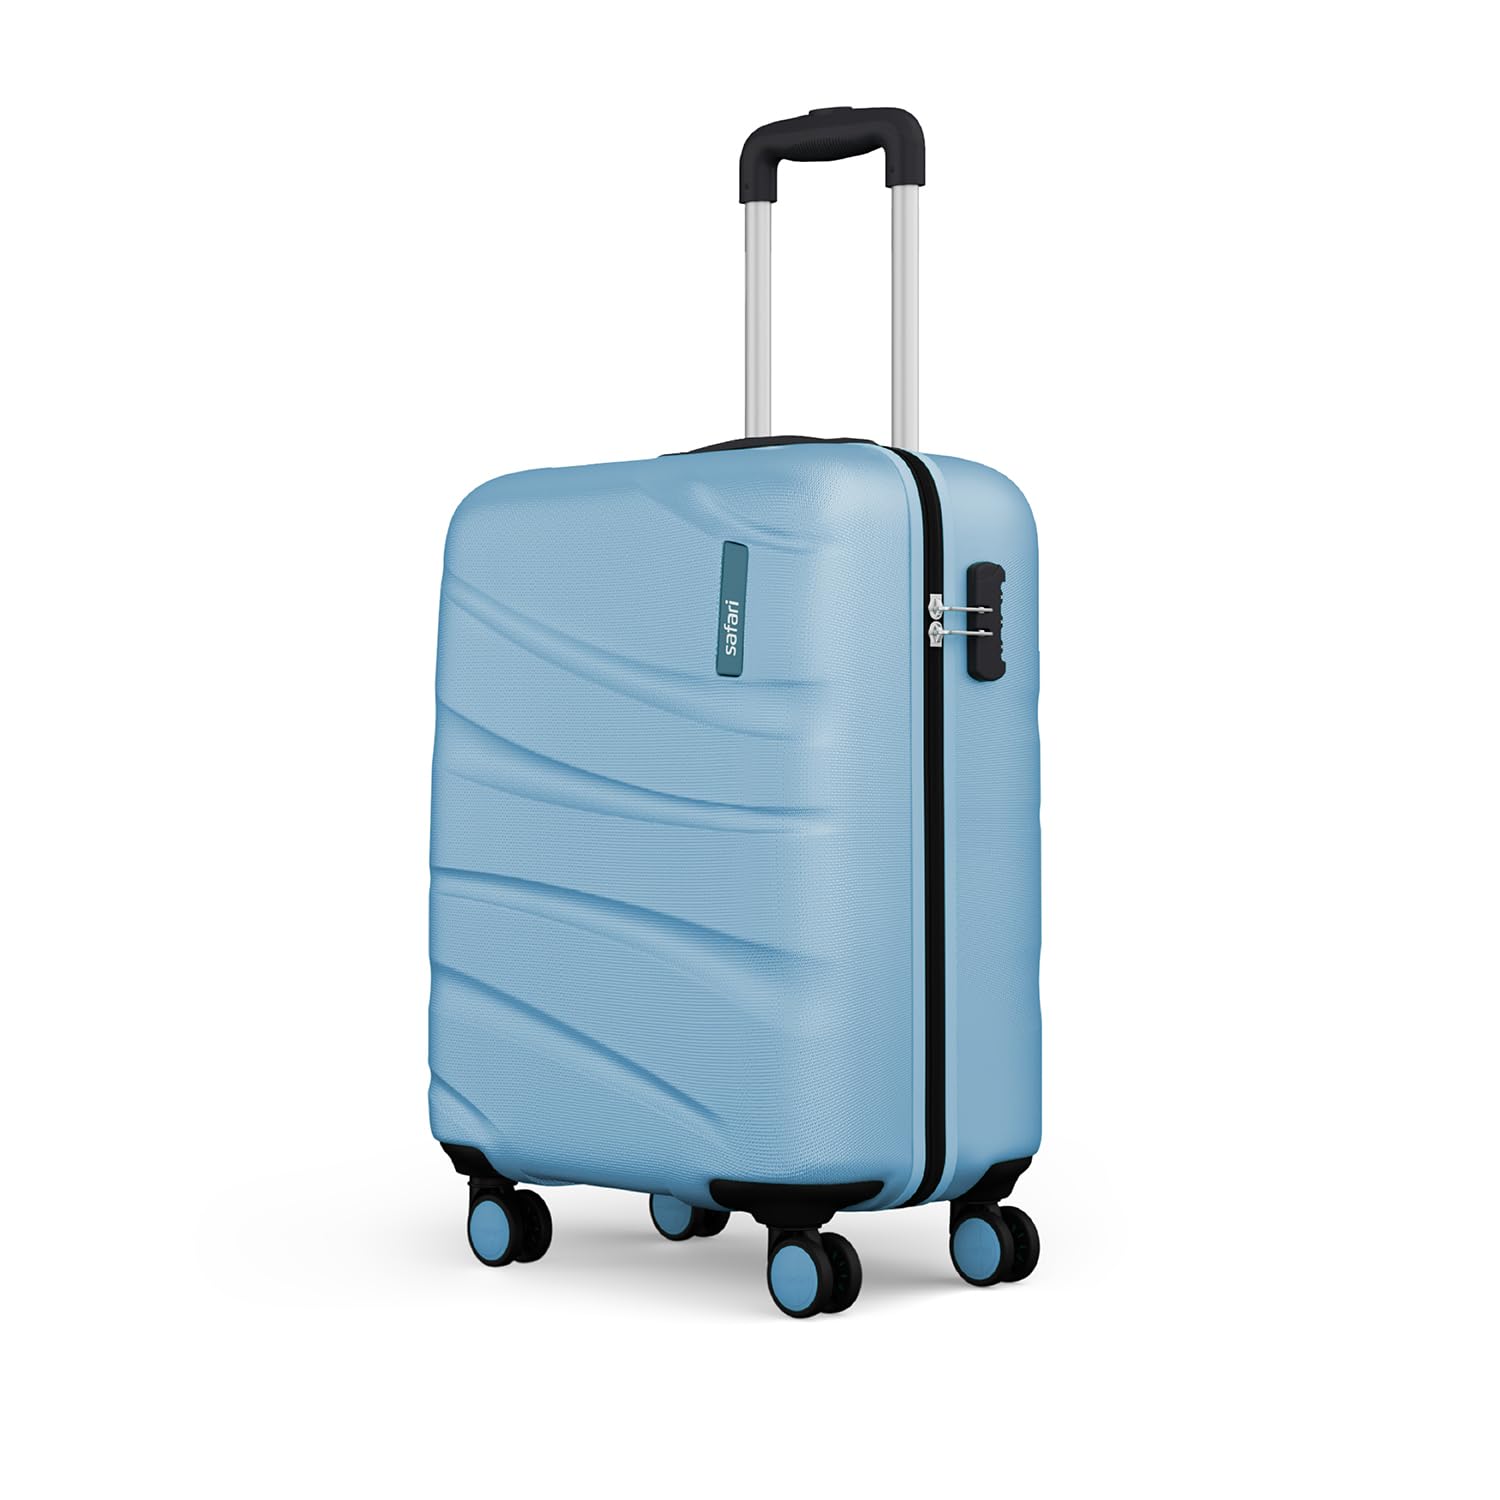 Best Trolley Bag For Travel